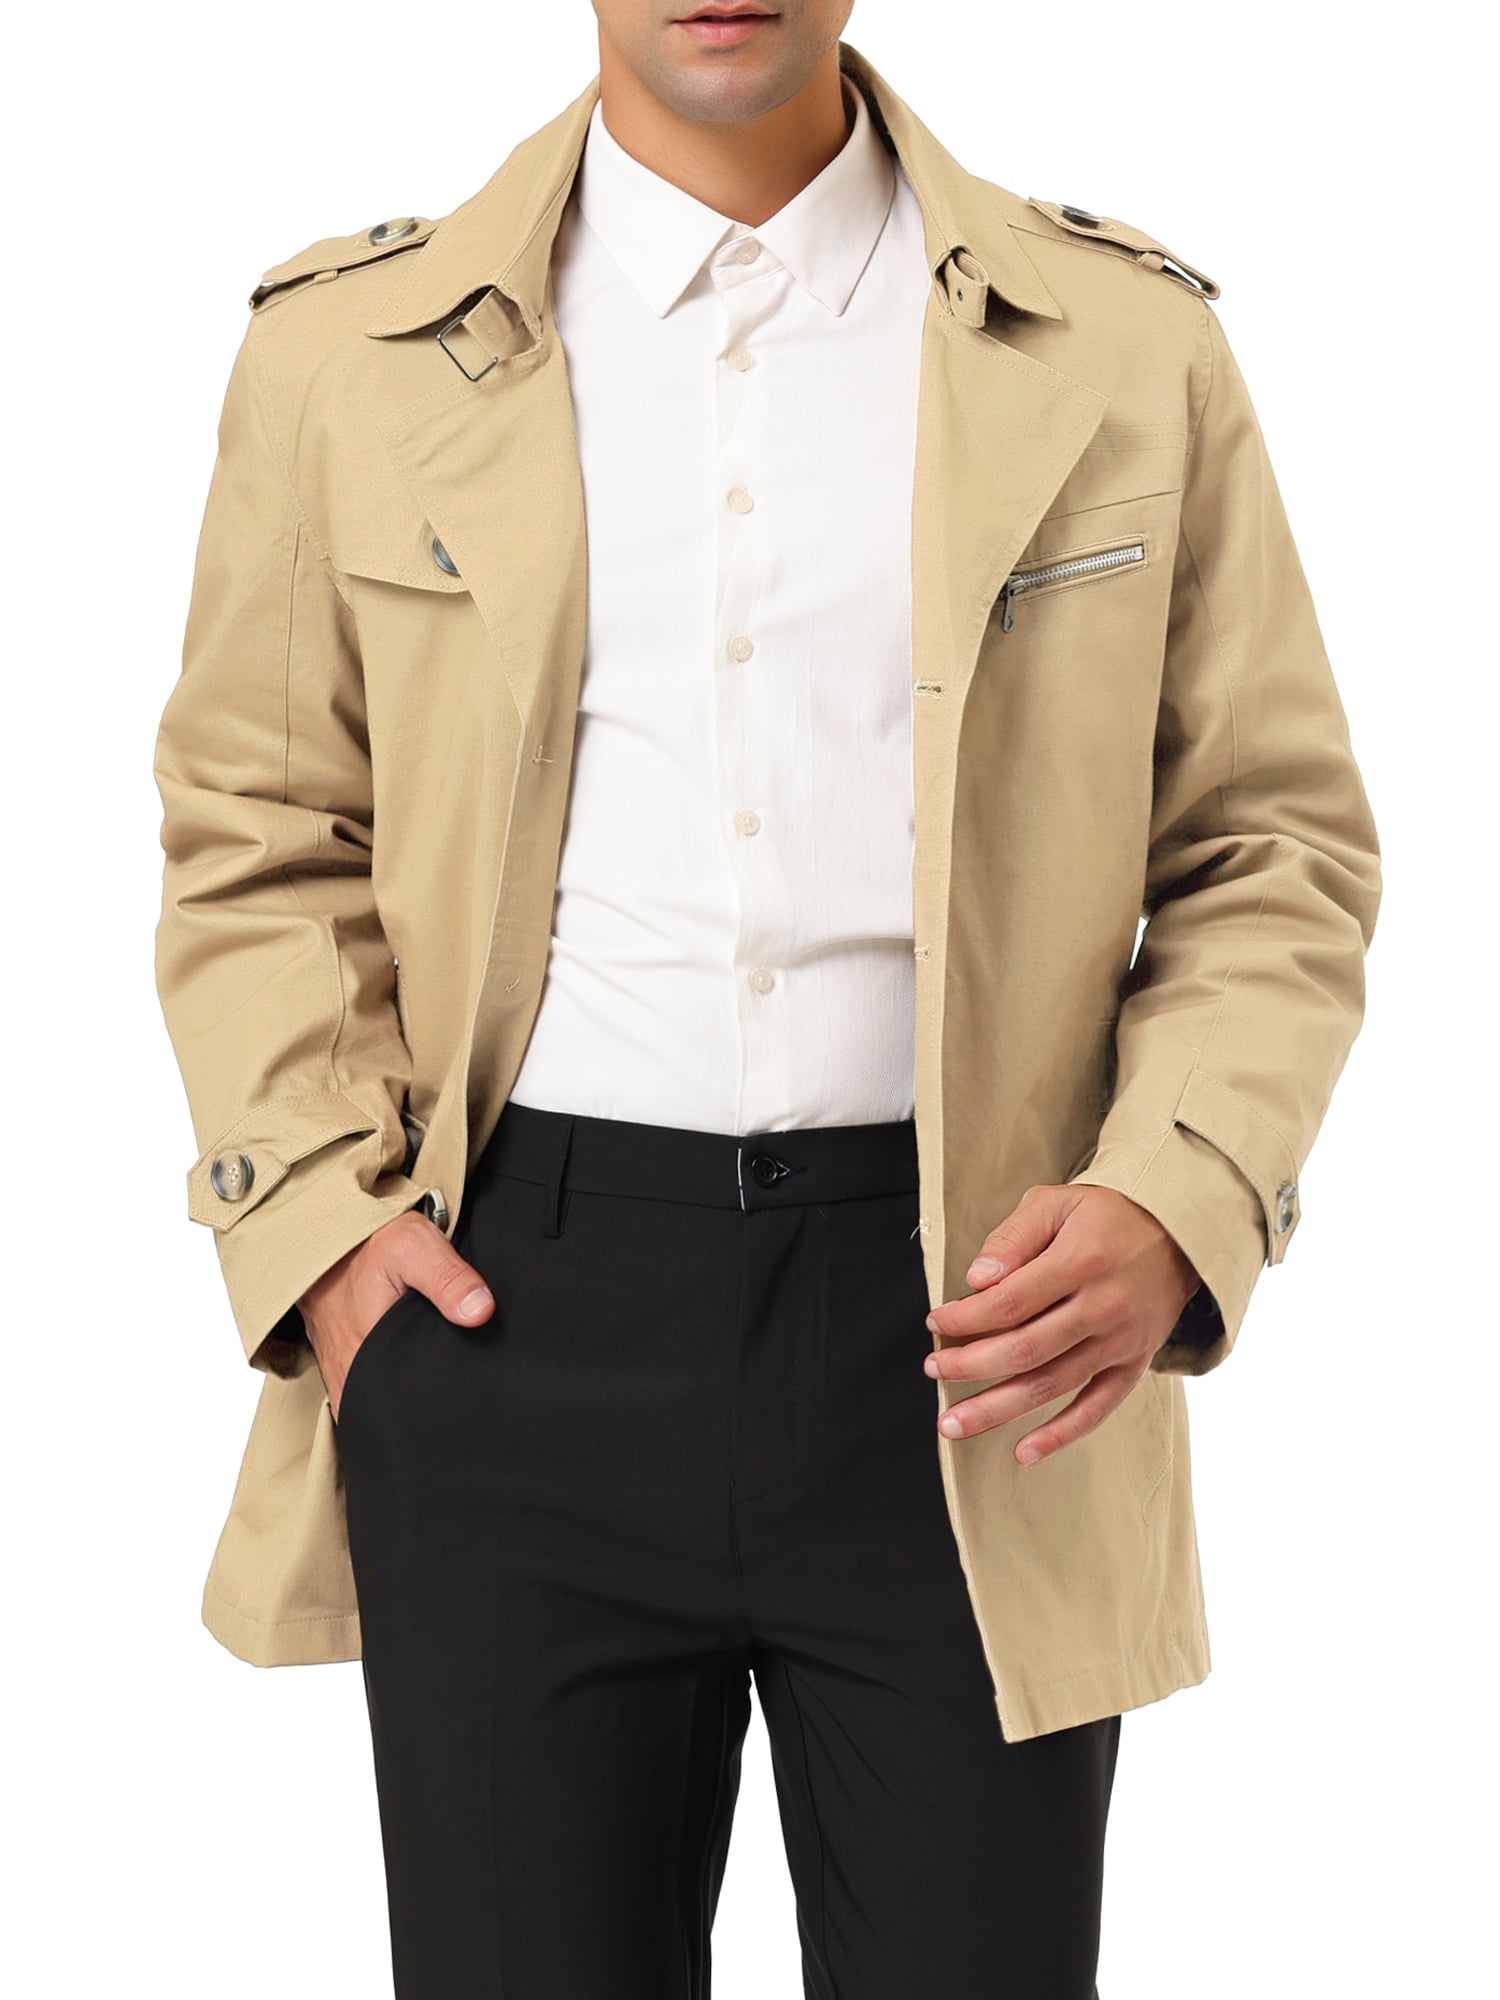 Lars Amadeus Men's Trench Coat Notched Collar Single Breasted ...